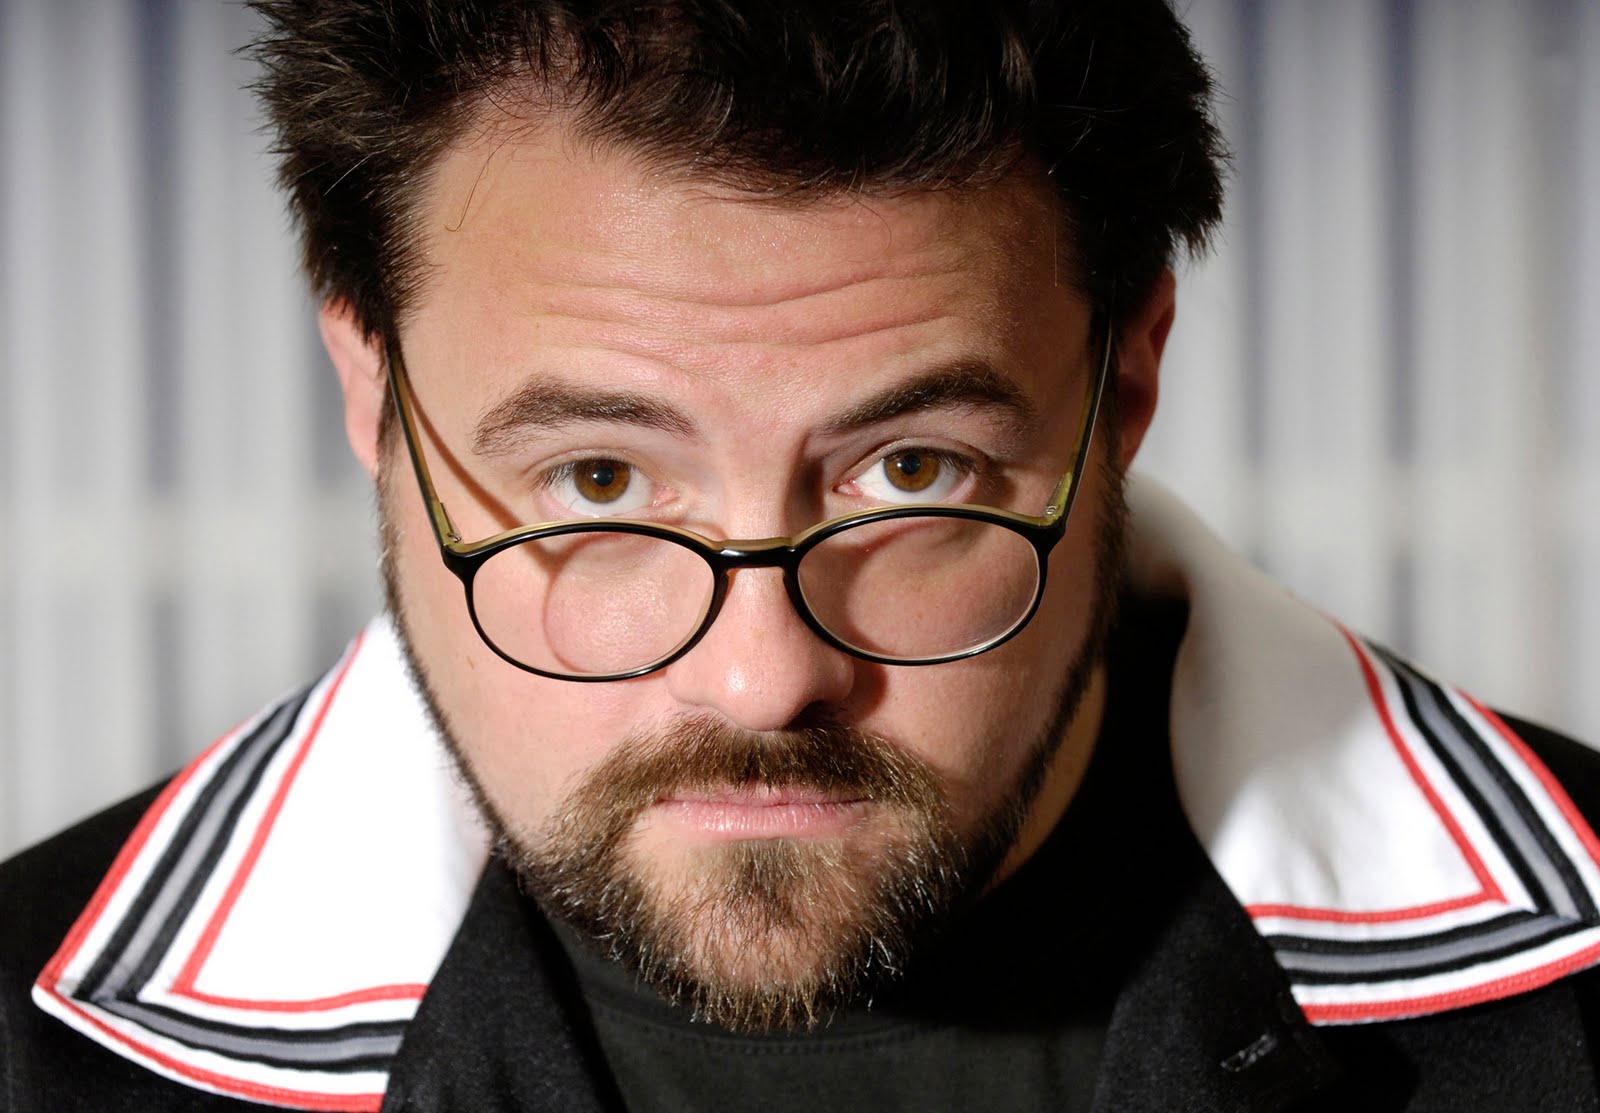 Kevin Smith Live from Behind: One Night only Thursday Feb 2nd